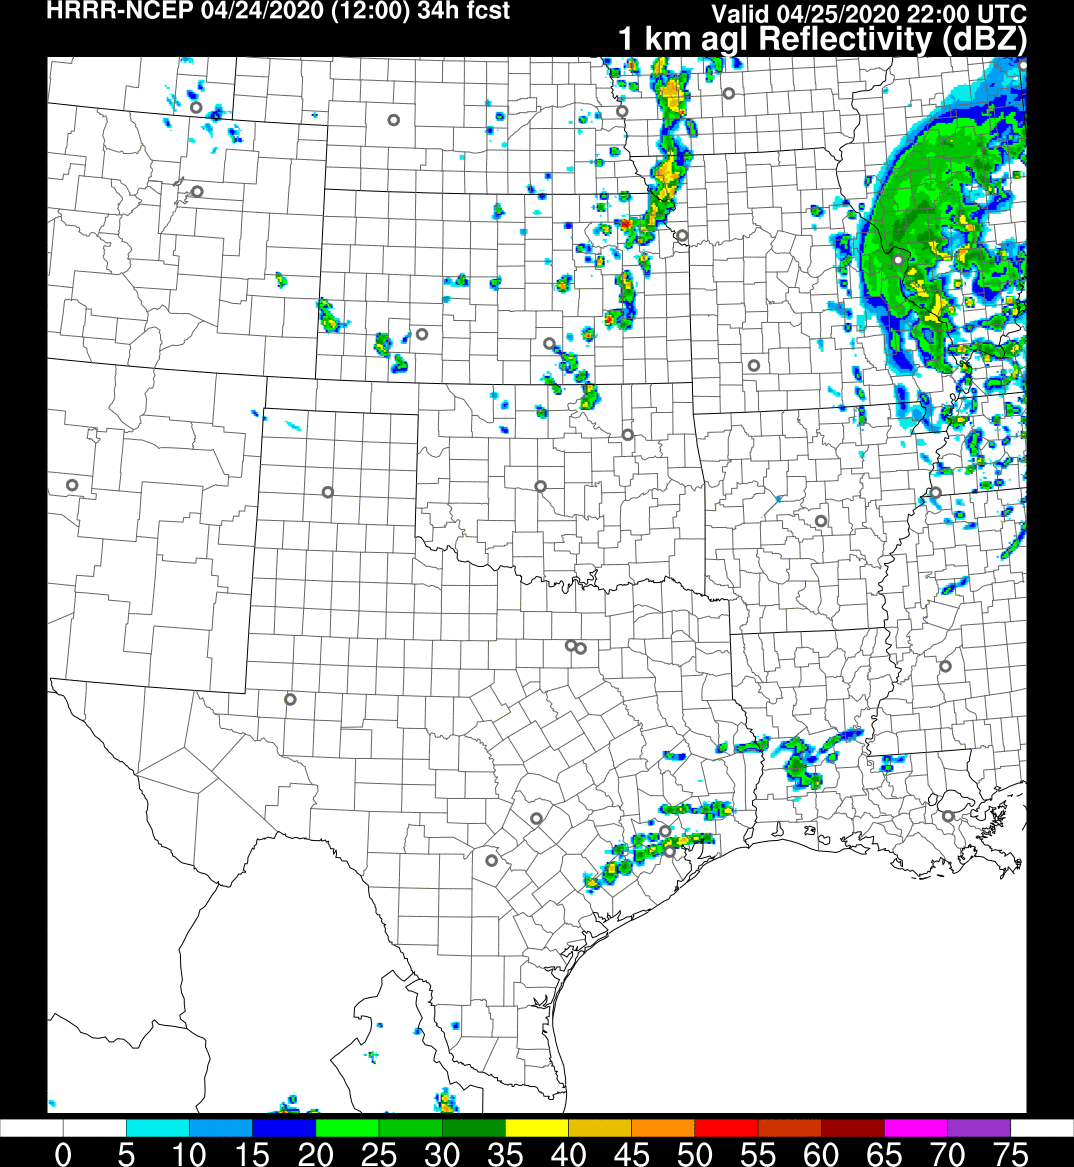 Putting all this together, there's no real reason to forecast or even mention rain. Euro precip was trace, GFS precip was trace, NAM precip was nil. Unless of course you used the HRRR model. Here's the HRRR precip forecast from its 12z Friday AM run for Saturday evening. (5/x)